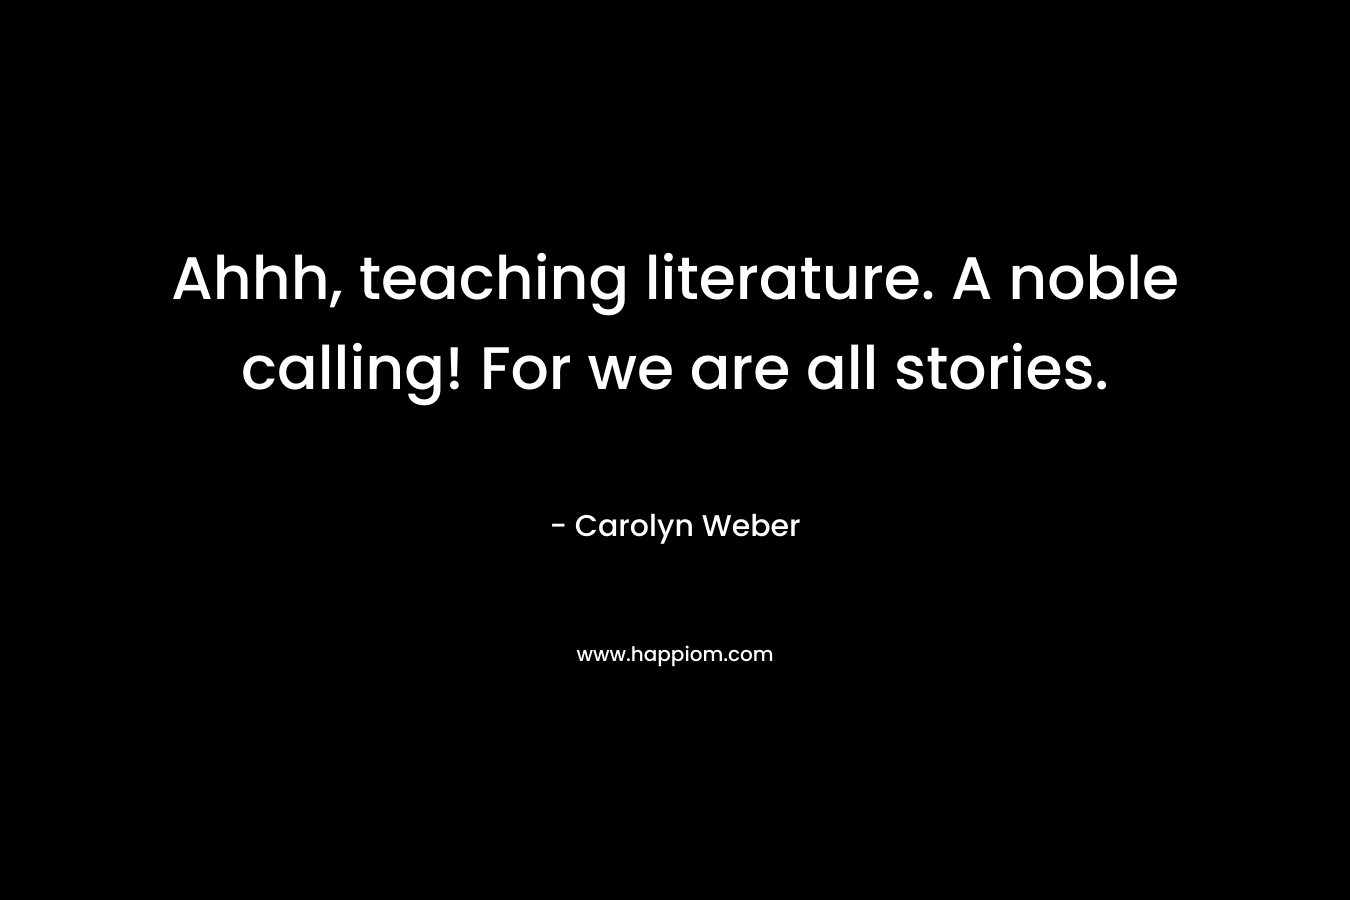 Ahhh, teaching literature. A noble calling! For we are all stories.